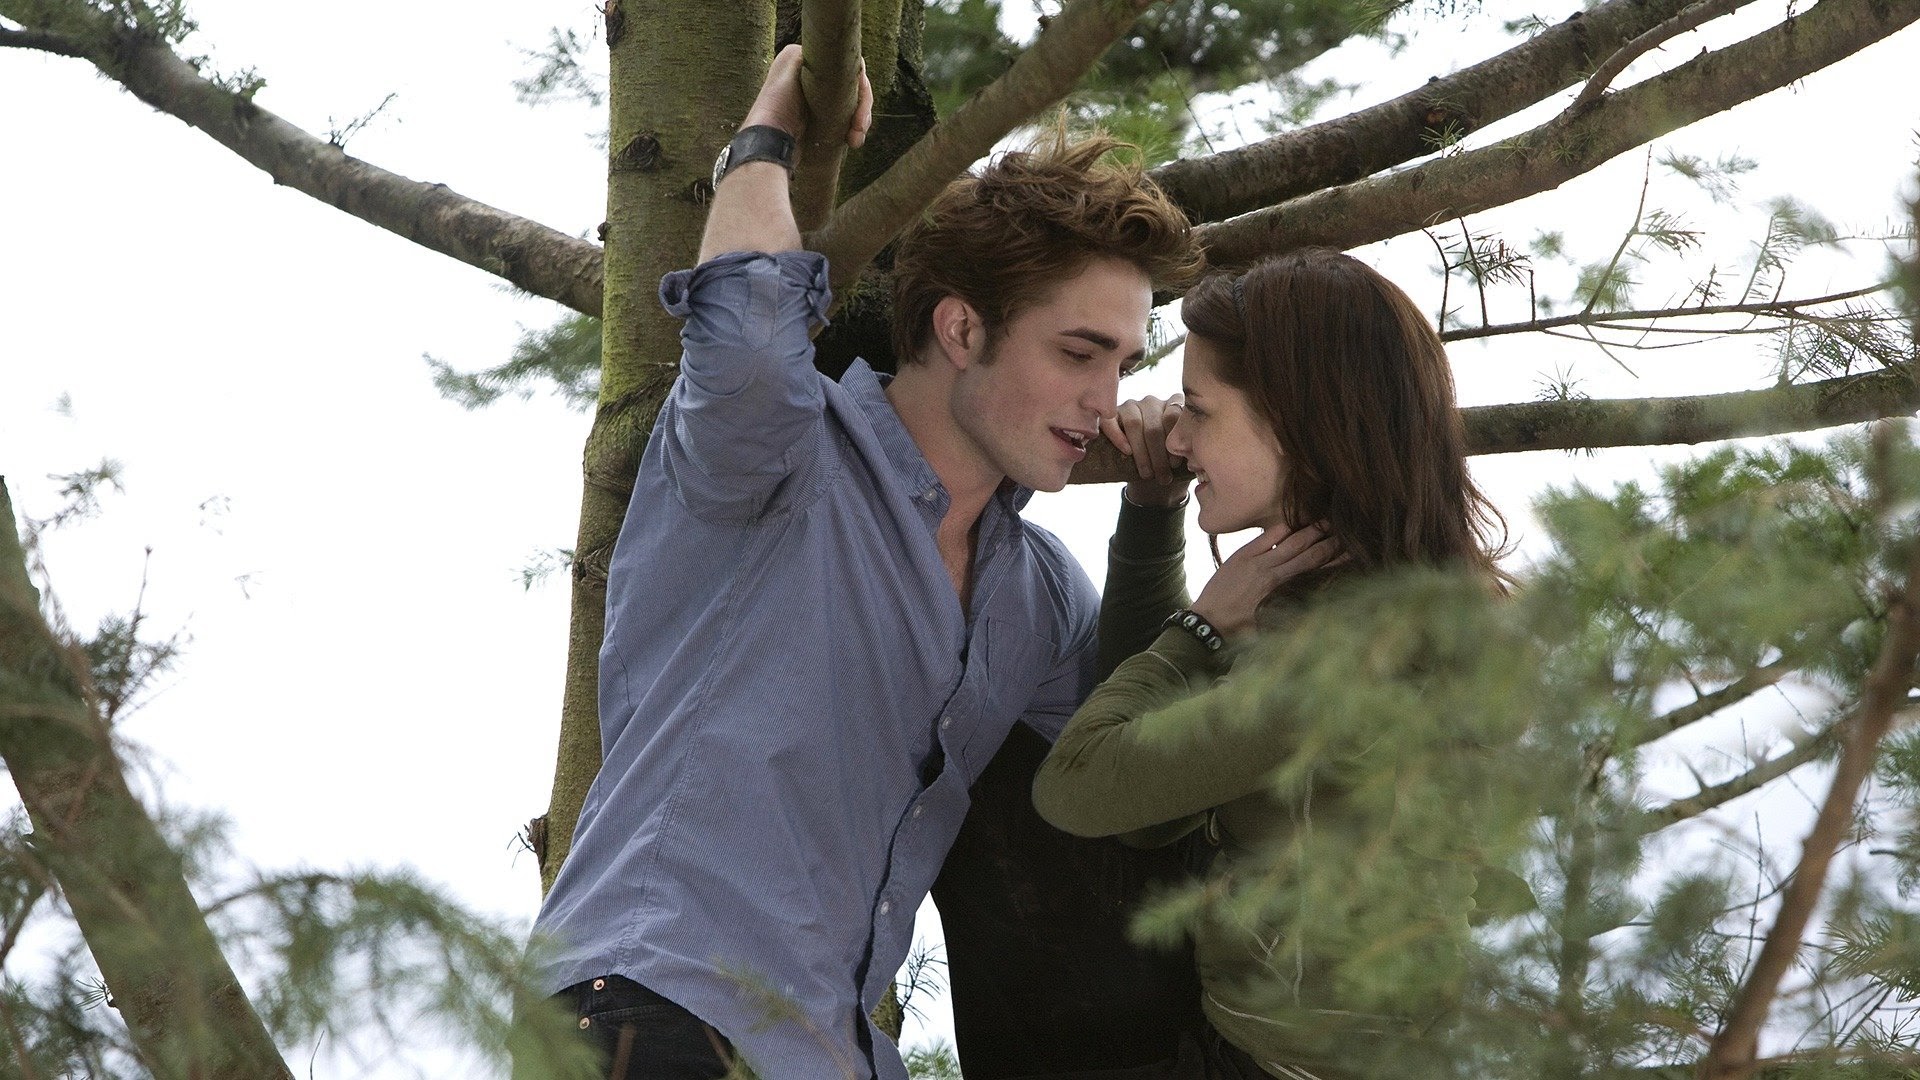 10 songs from the “Twilight” saga worth watching (part 2)